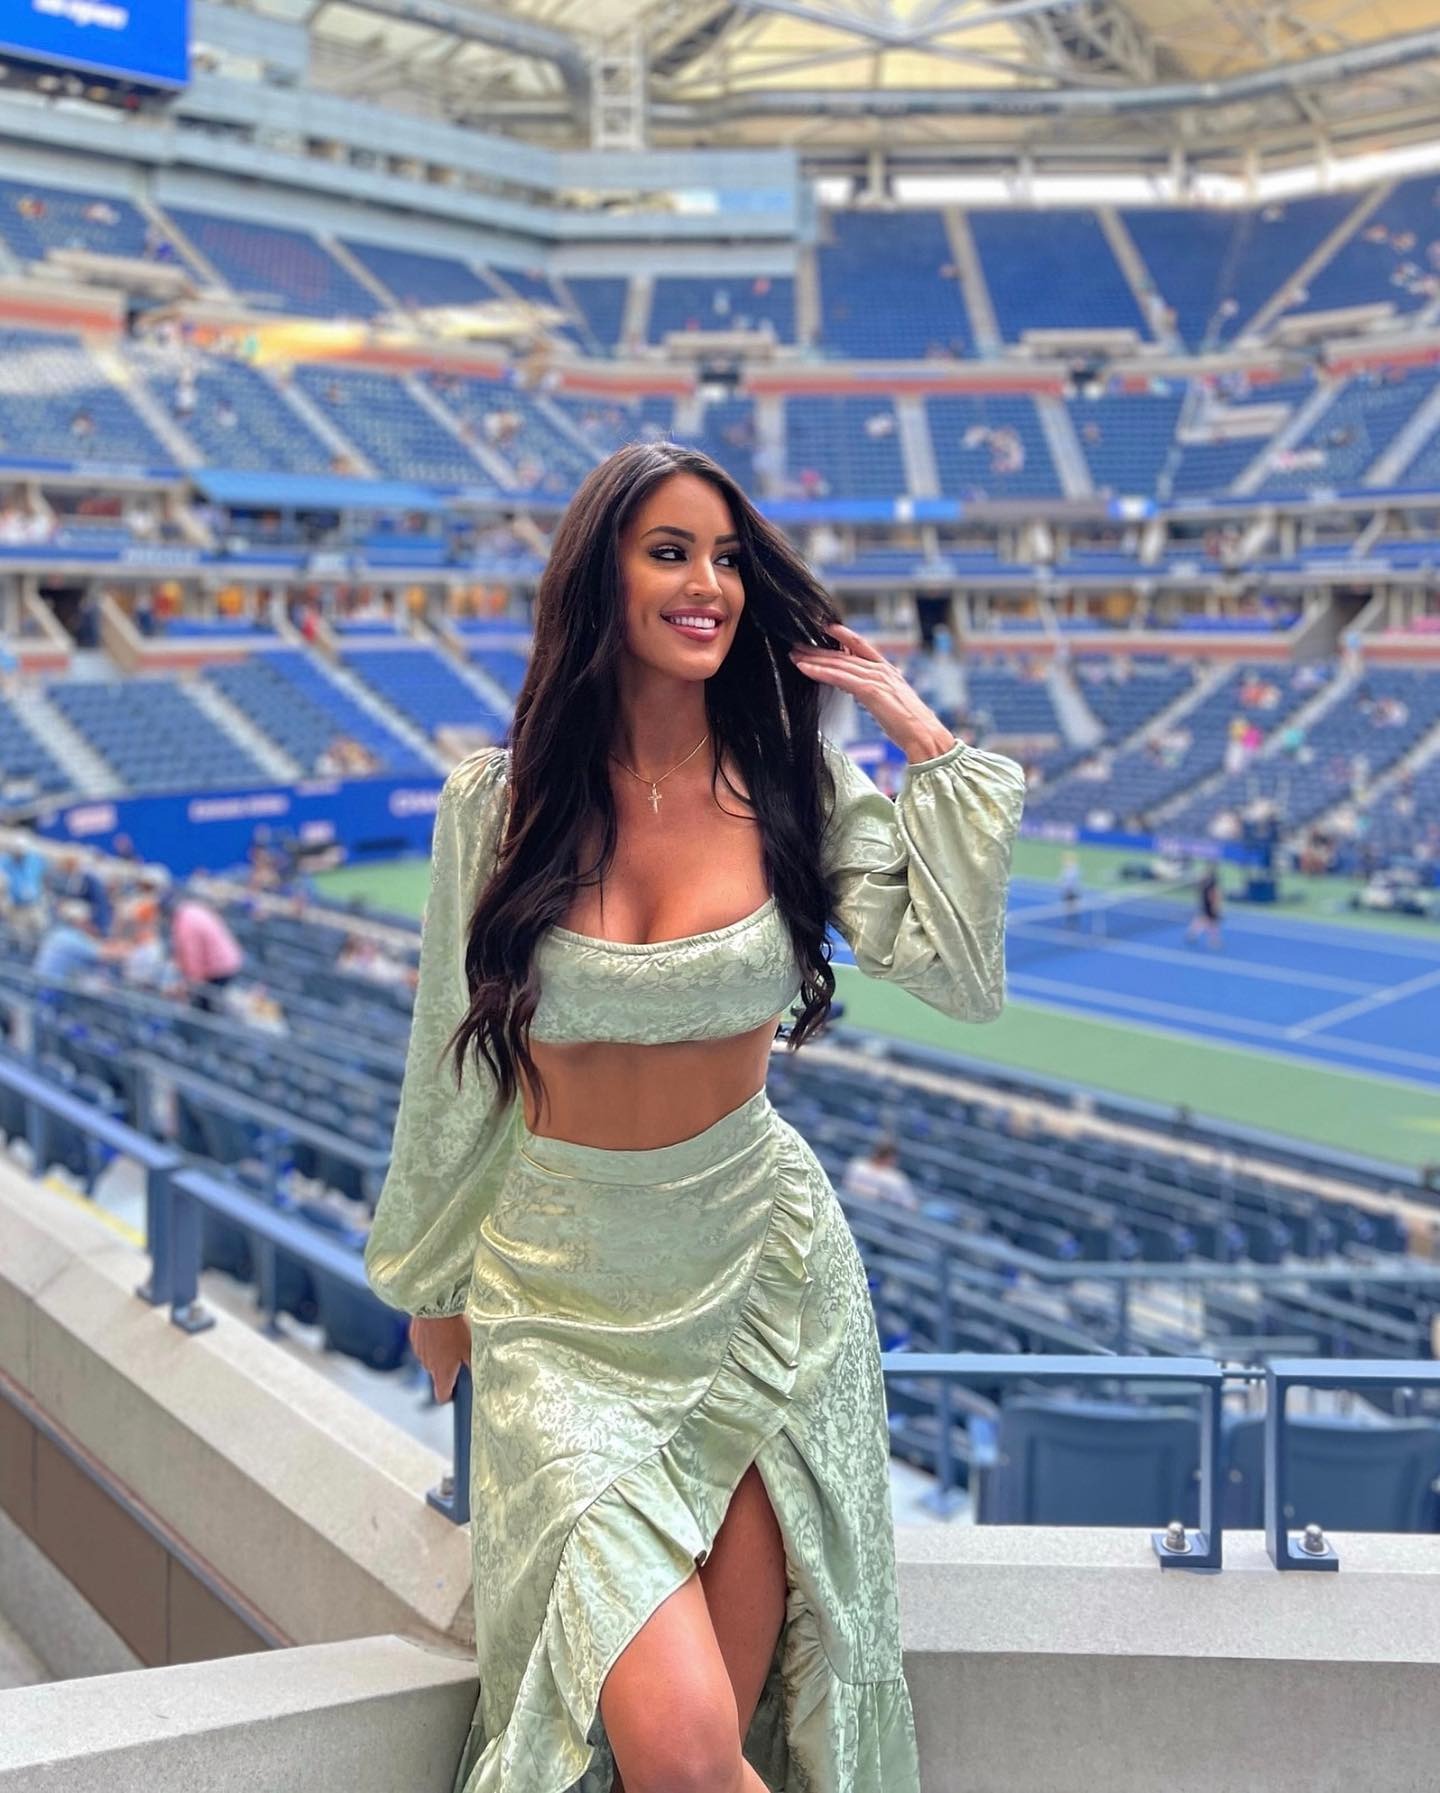 , World’s sexiest tennis influencer Rachel Stuhlmann wows in tiny top as she gives fans tips on their game